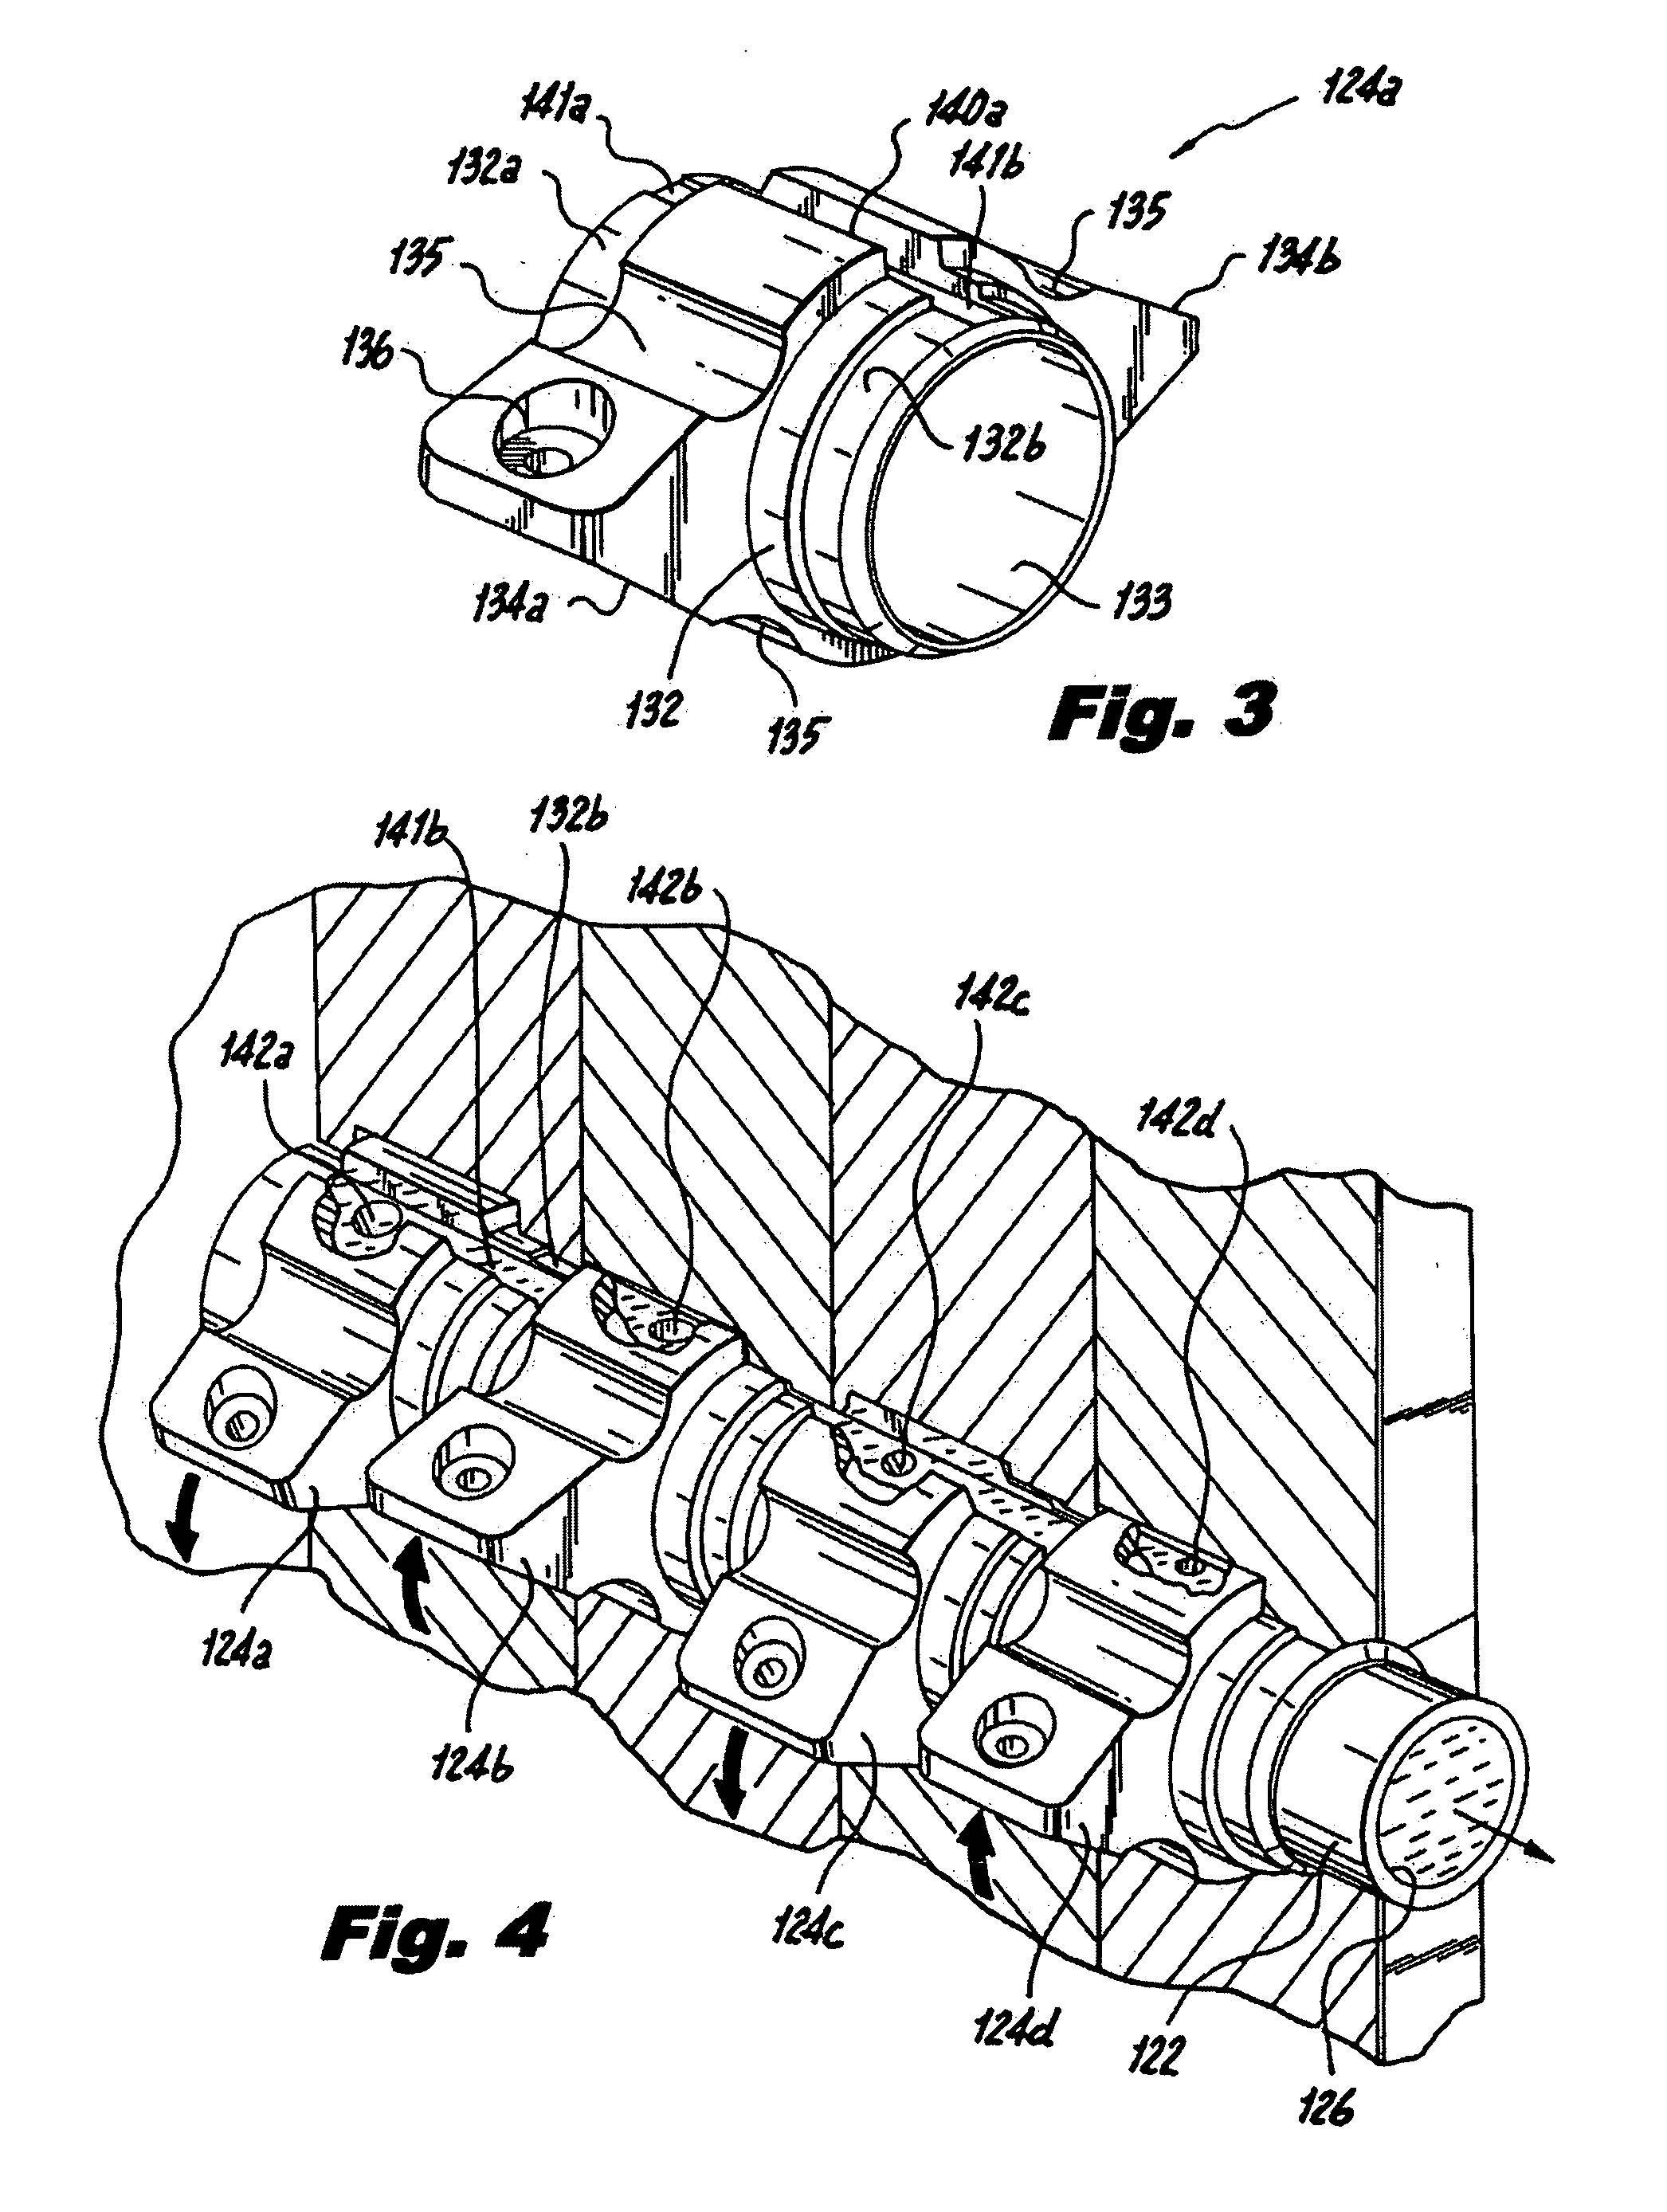 Valve assembly for modulating fuel flow to a gas turbine engine